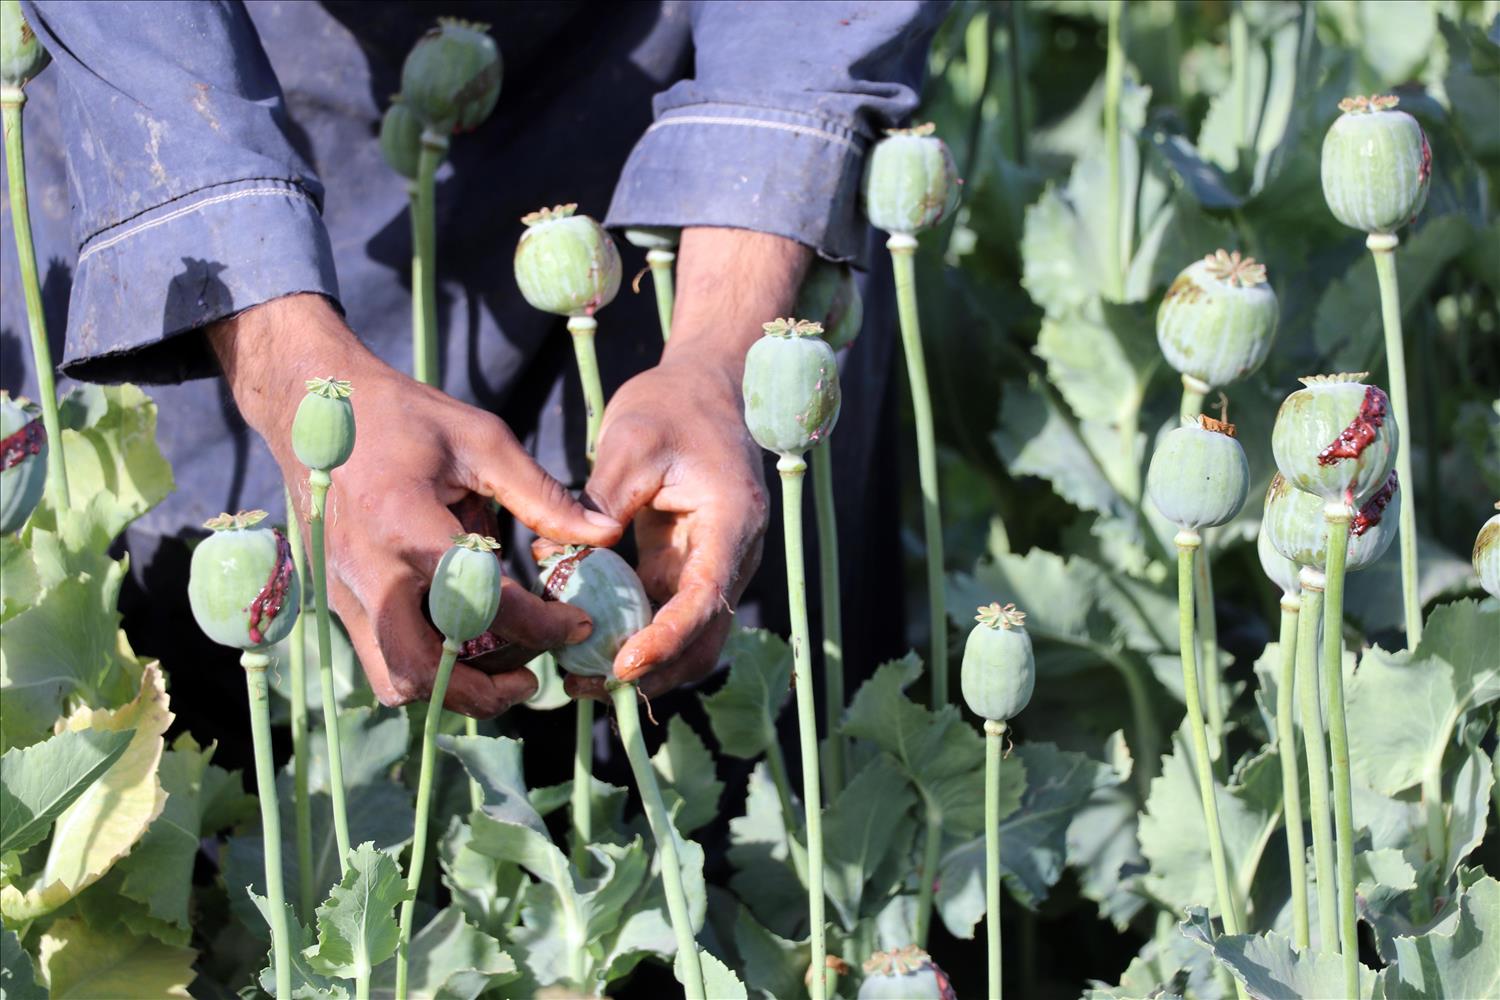 Despite The Taliban's Pledge To Eradicate Opium, The Poppy Trade Still Flourishes In Afghanistan